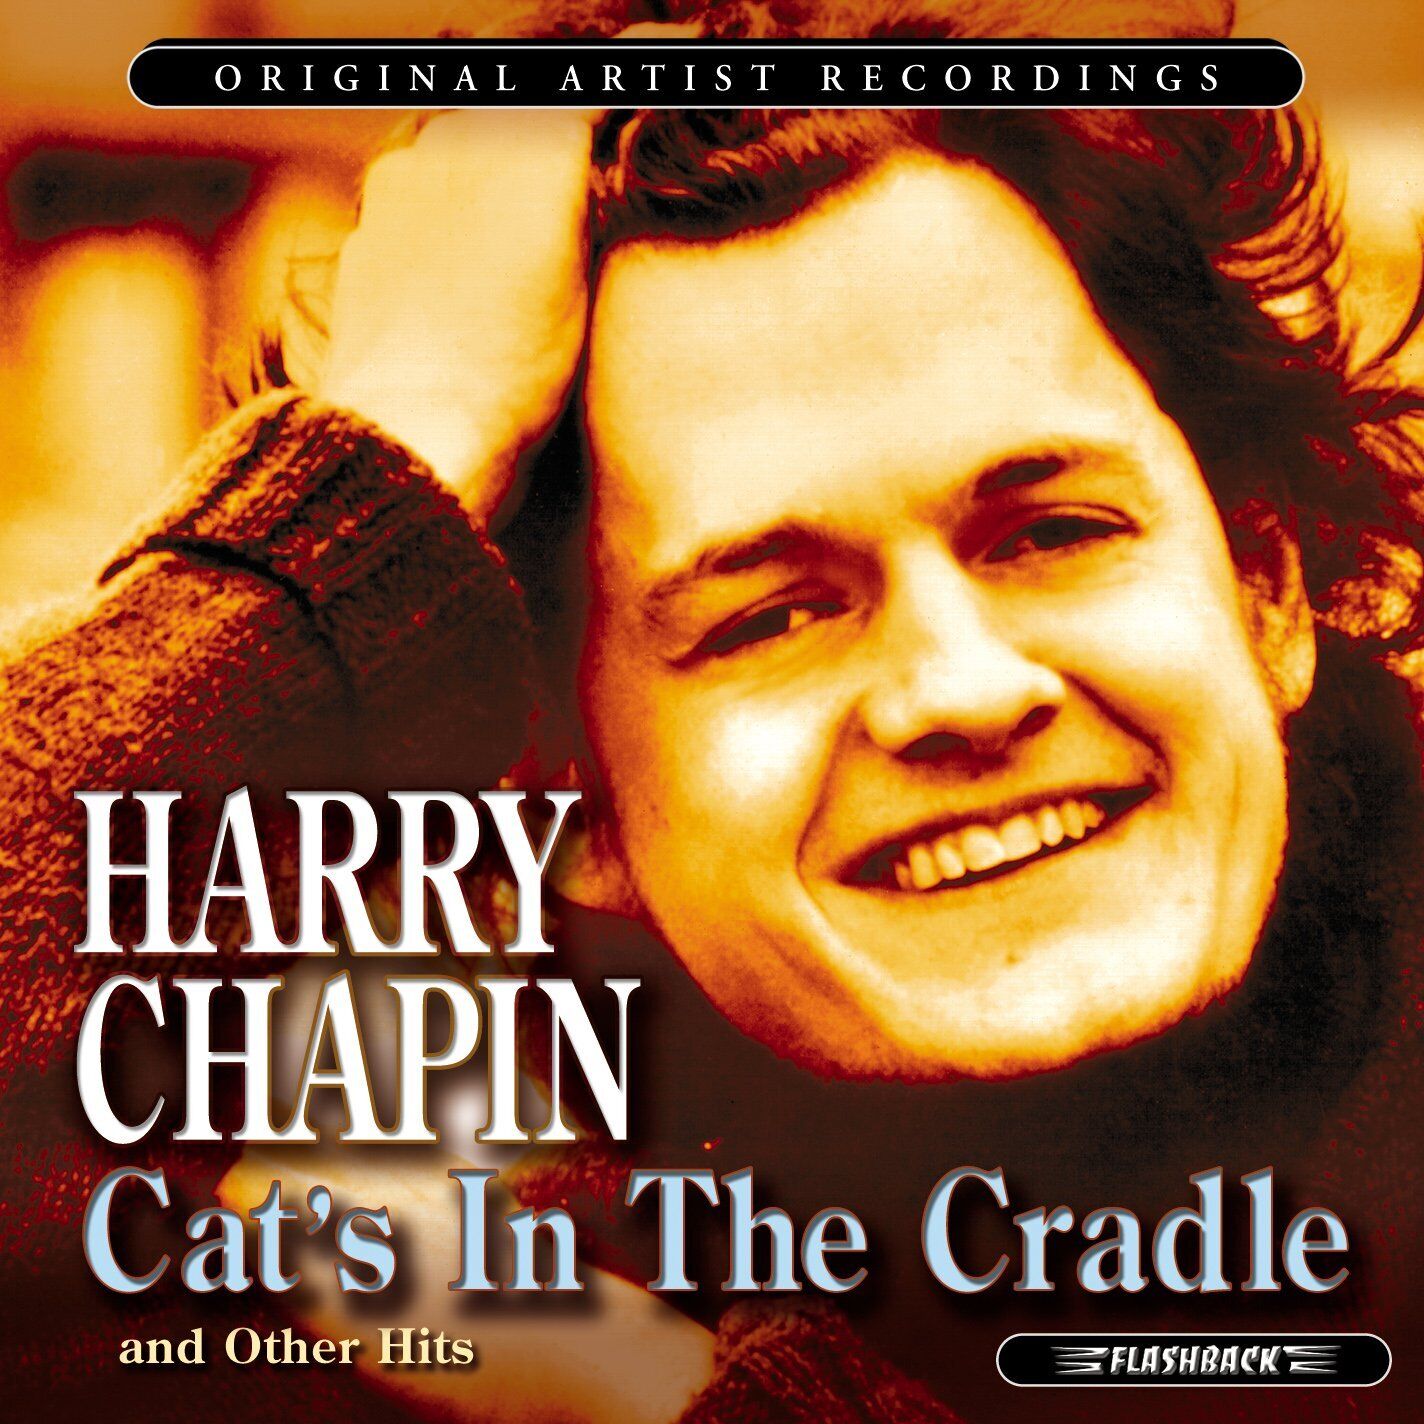 Harry Chapin Cat's in the Cradle and Other Hits (CD)